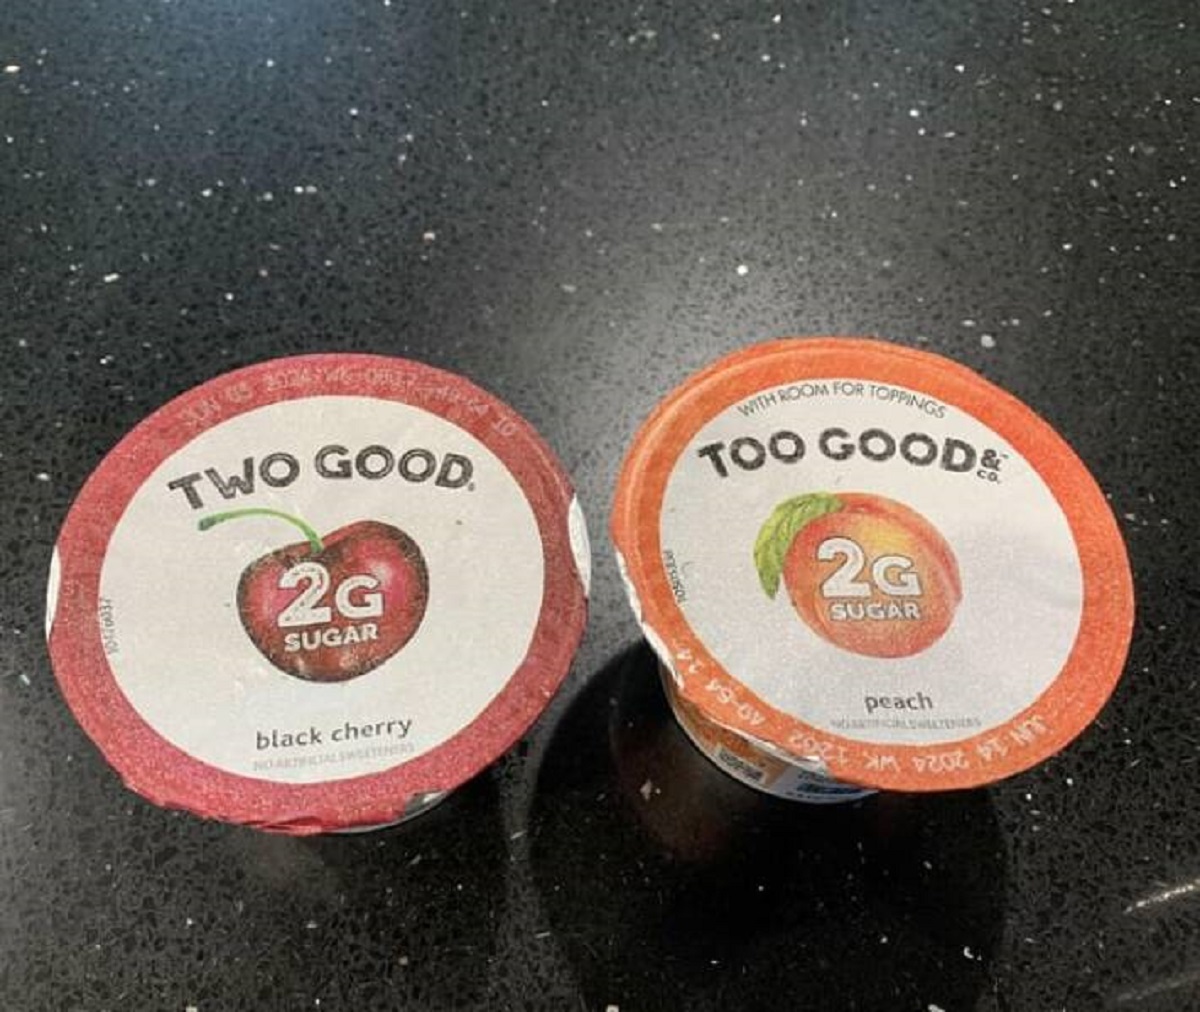 "My yogurts from the same brand have two different spellings of the brand name."